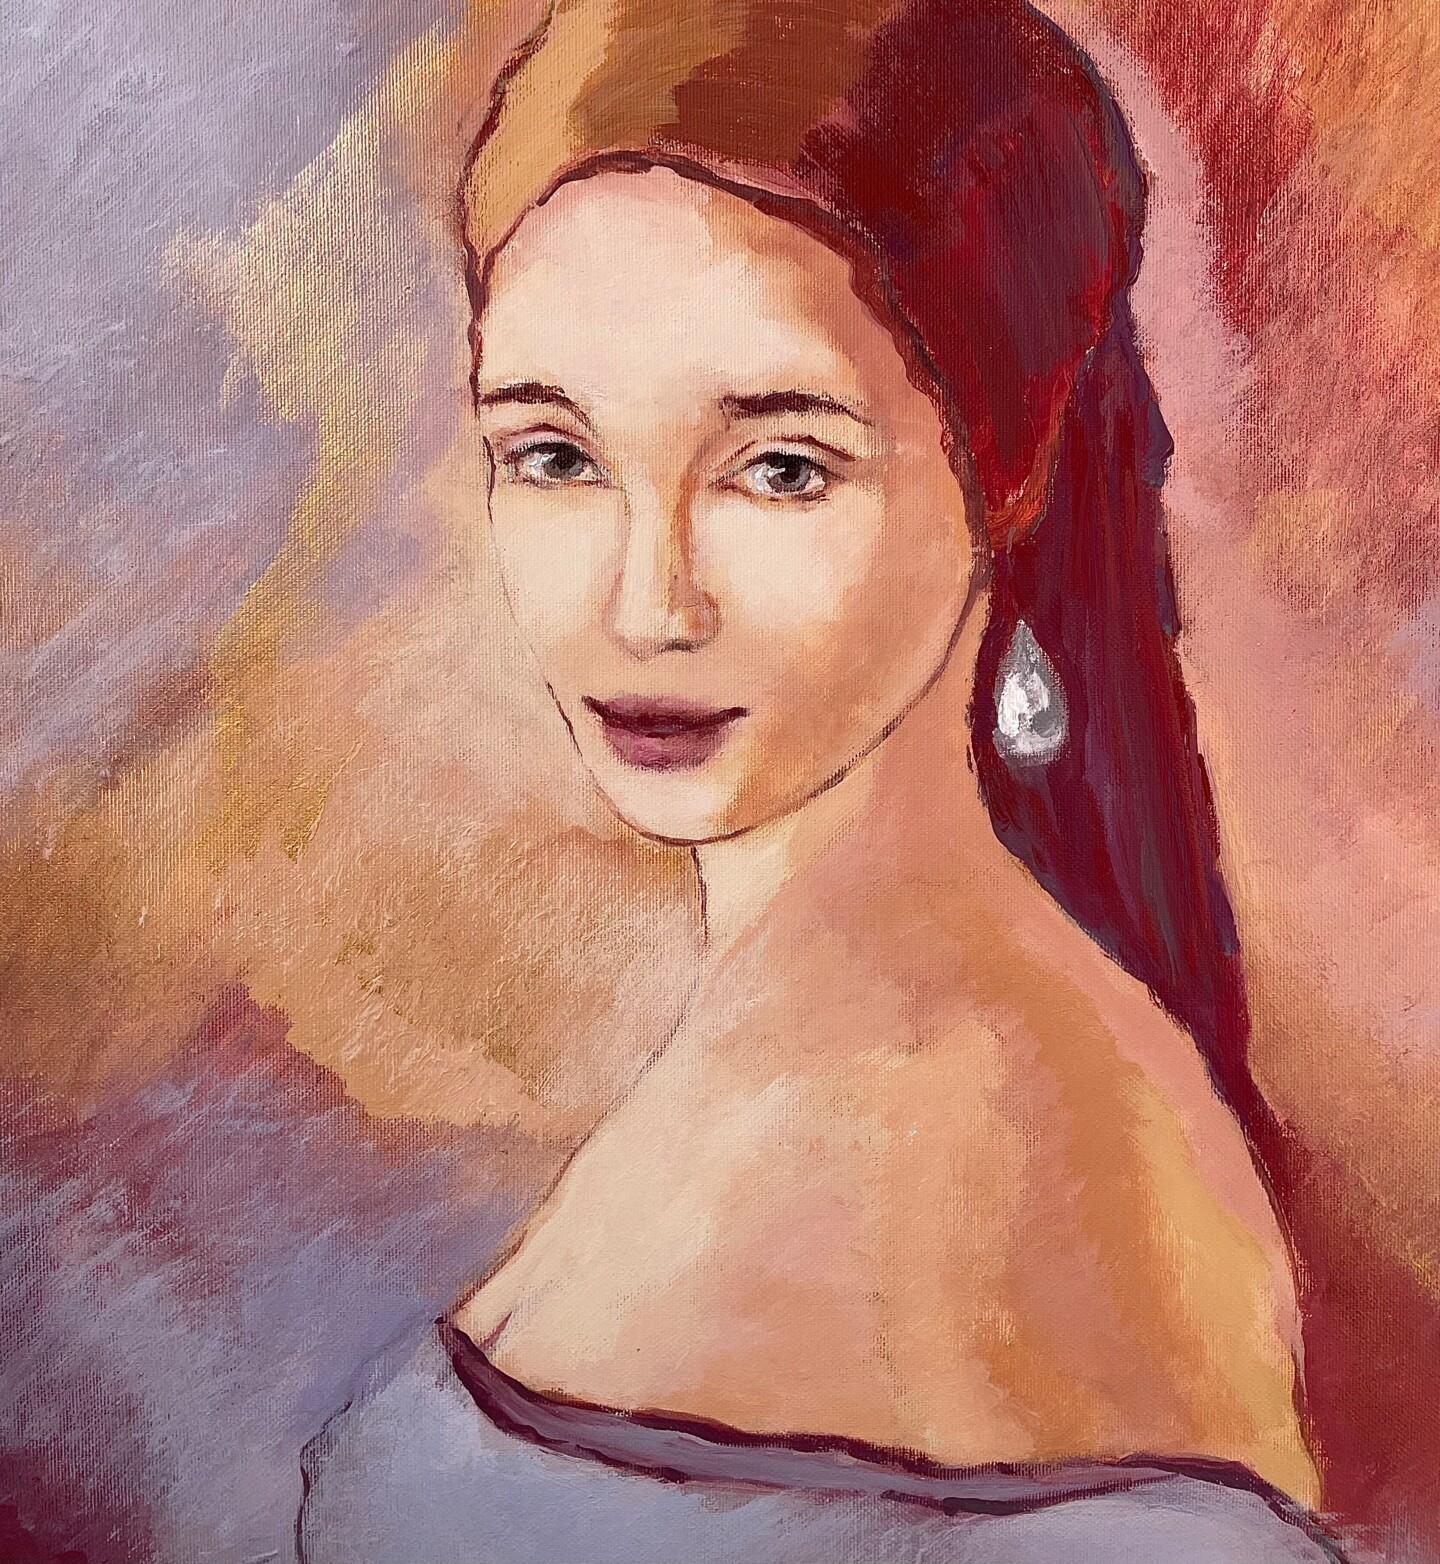 Tetiana Lukianchenko - The Girl with a pearl (2021)

This work was inspired by one of the most famous paintings by the Dutch artist Jan Vermeer. And this is my vision of the modern 